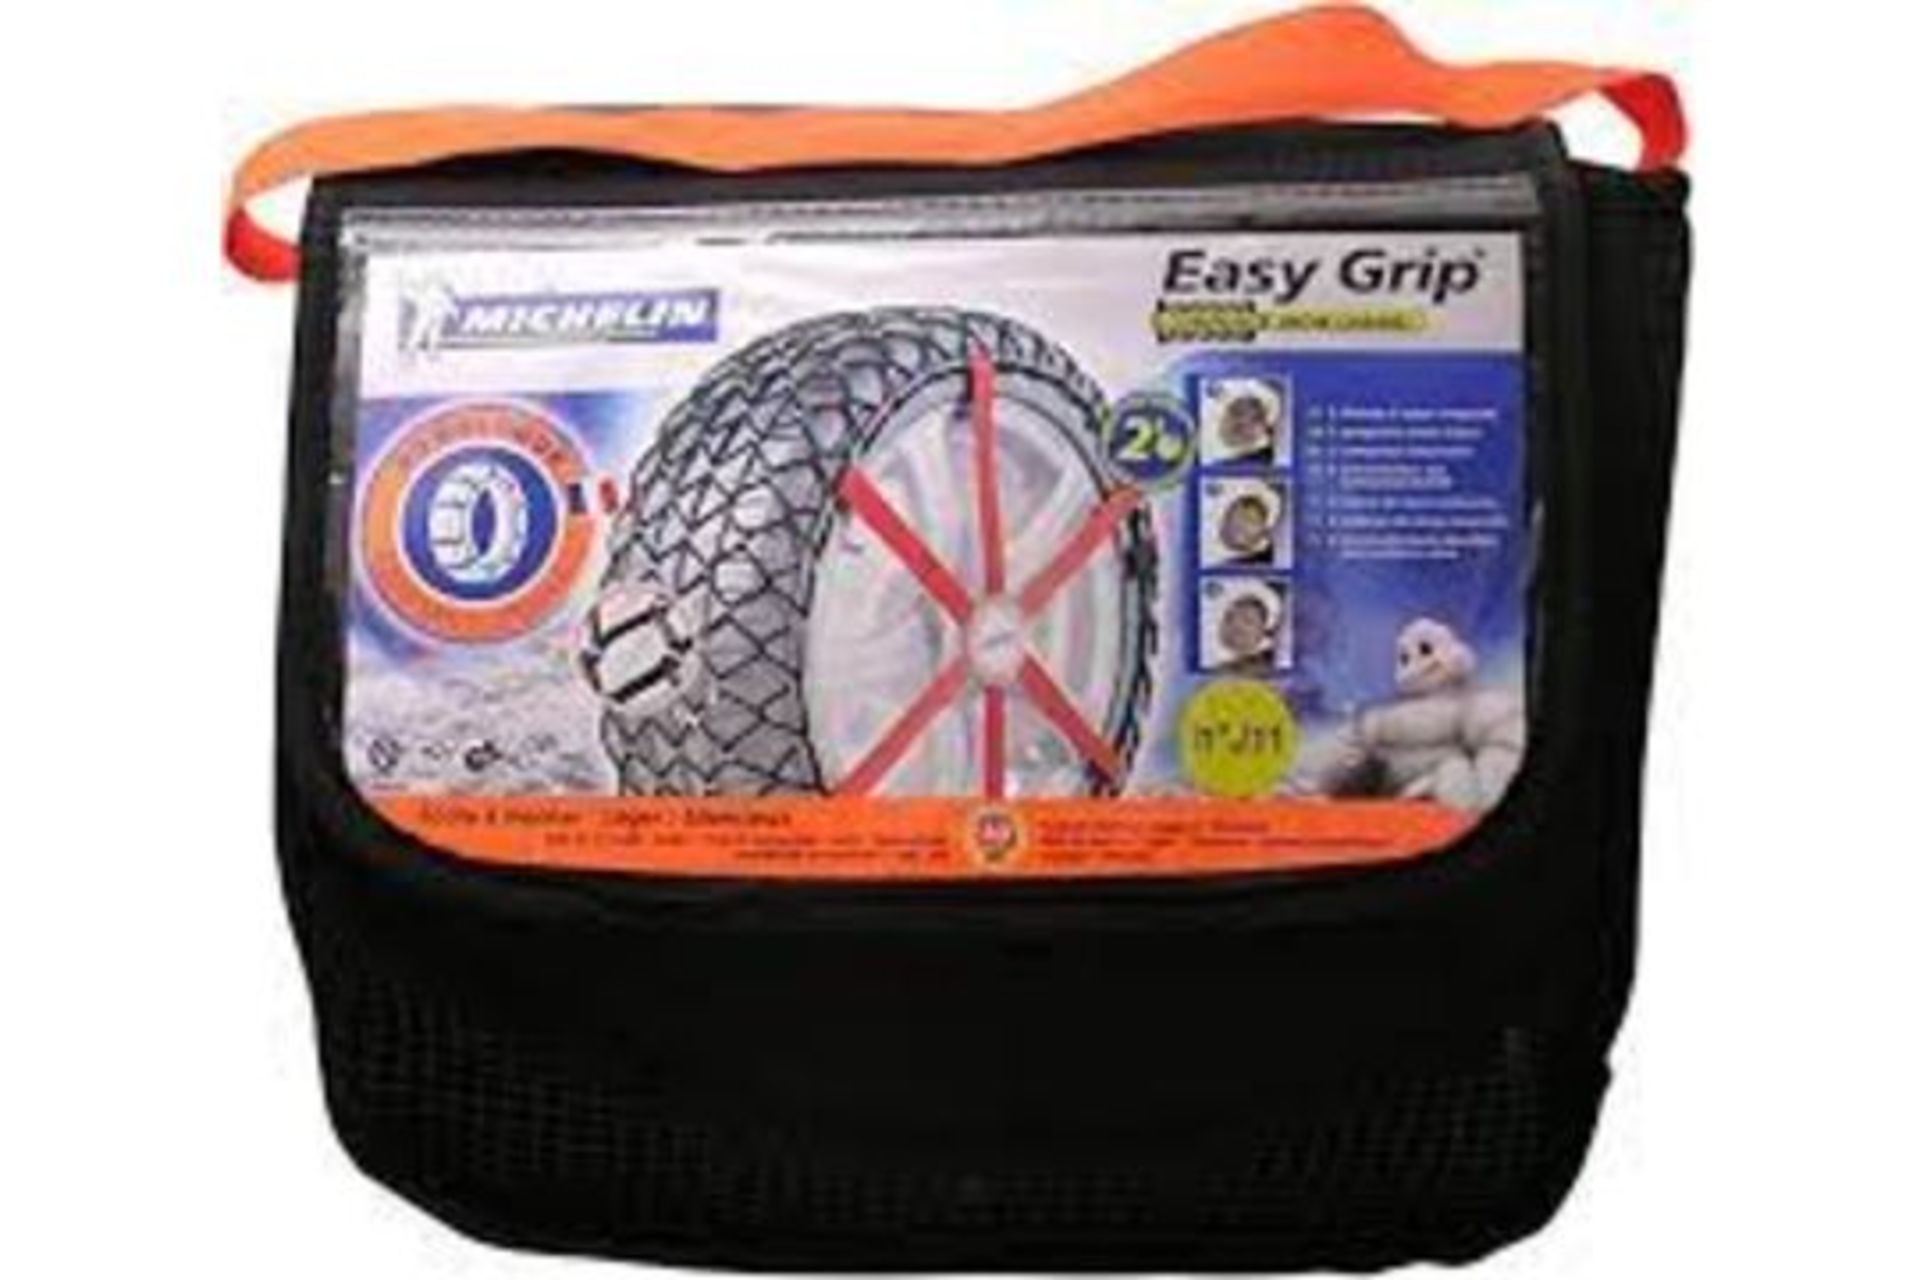 NEW PACKAGED SET OF Michelin Snow Sock Easy Grip R12. RRP £85.95. The Michelin Easy Grip is an